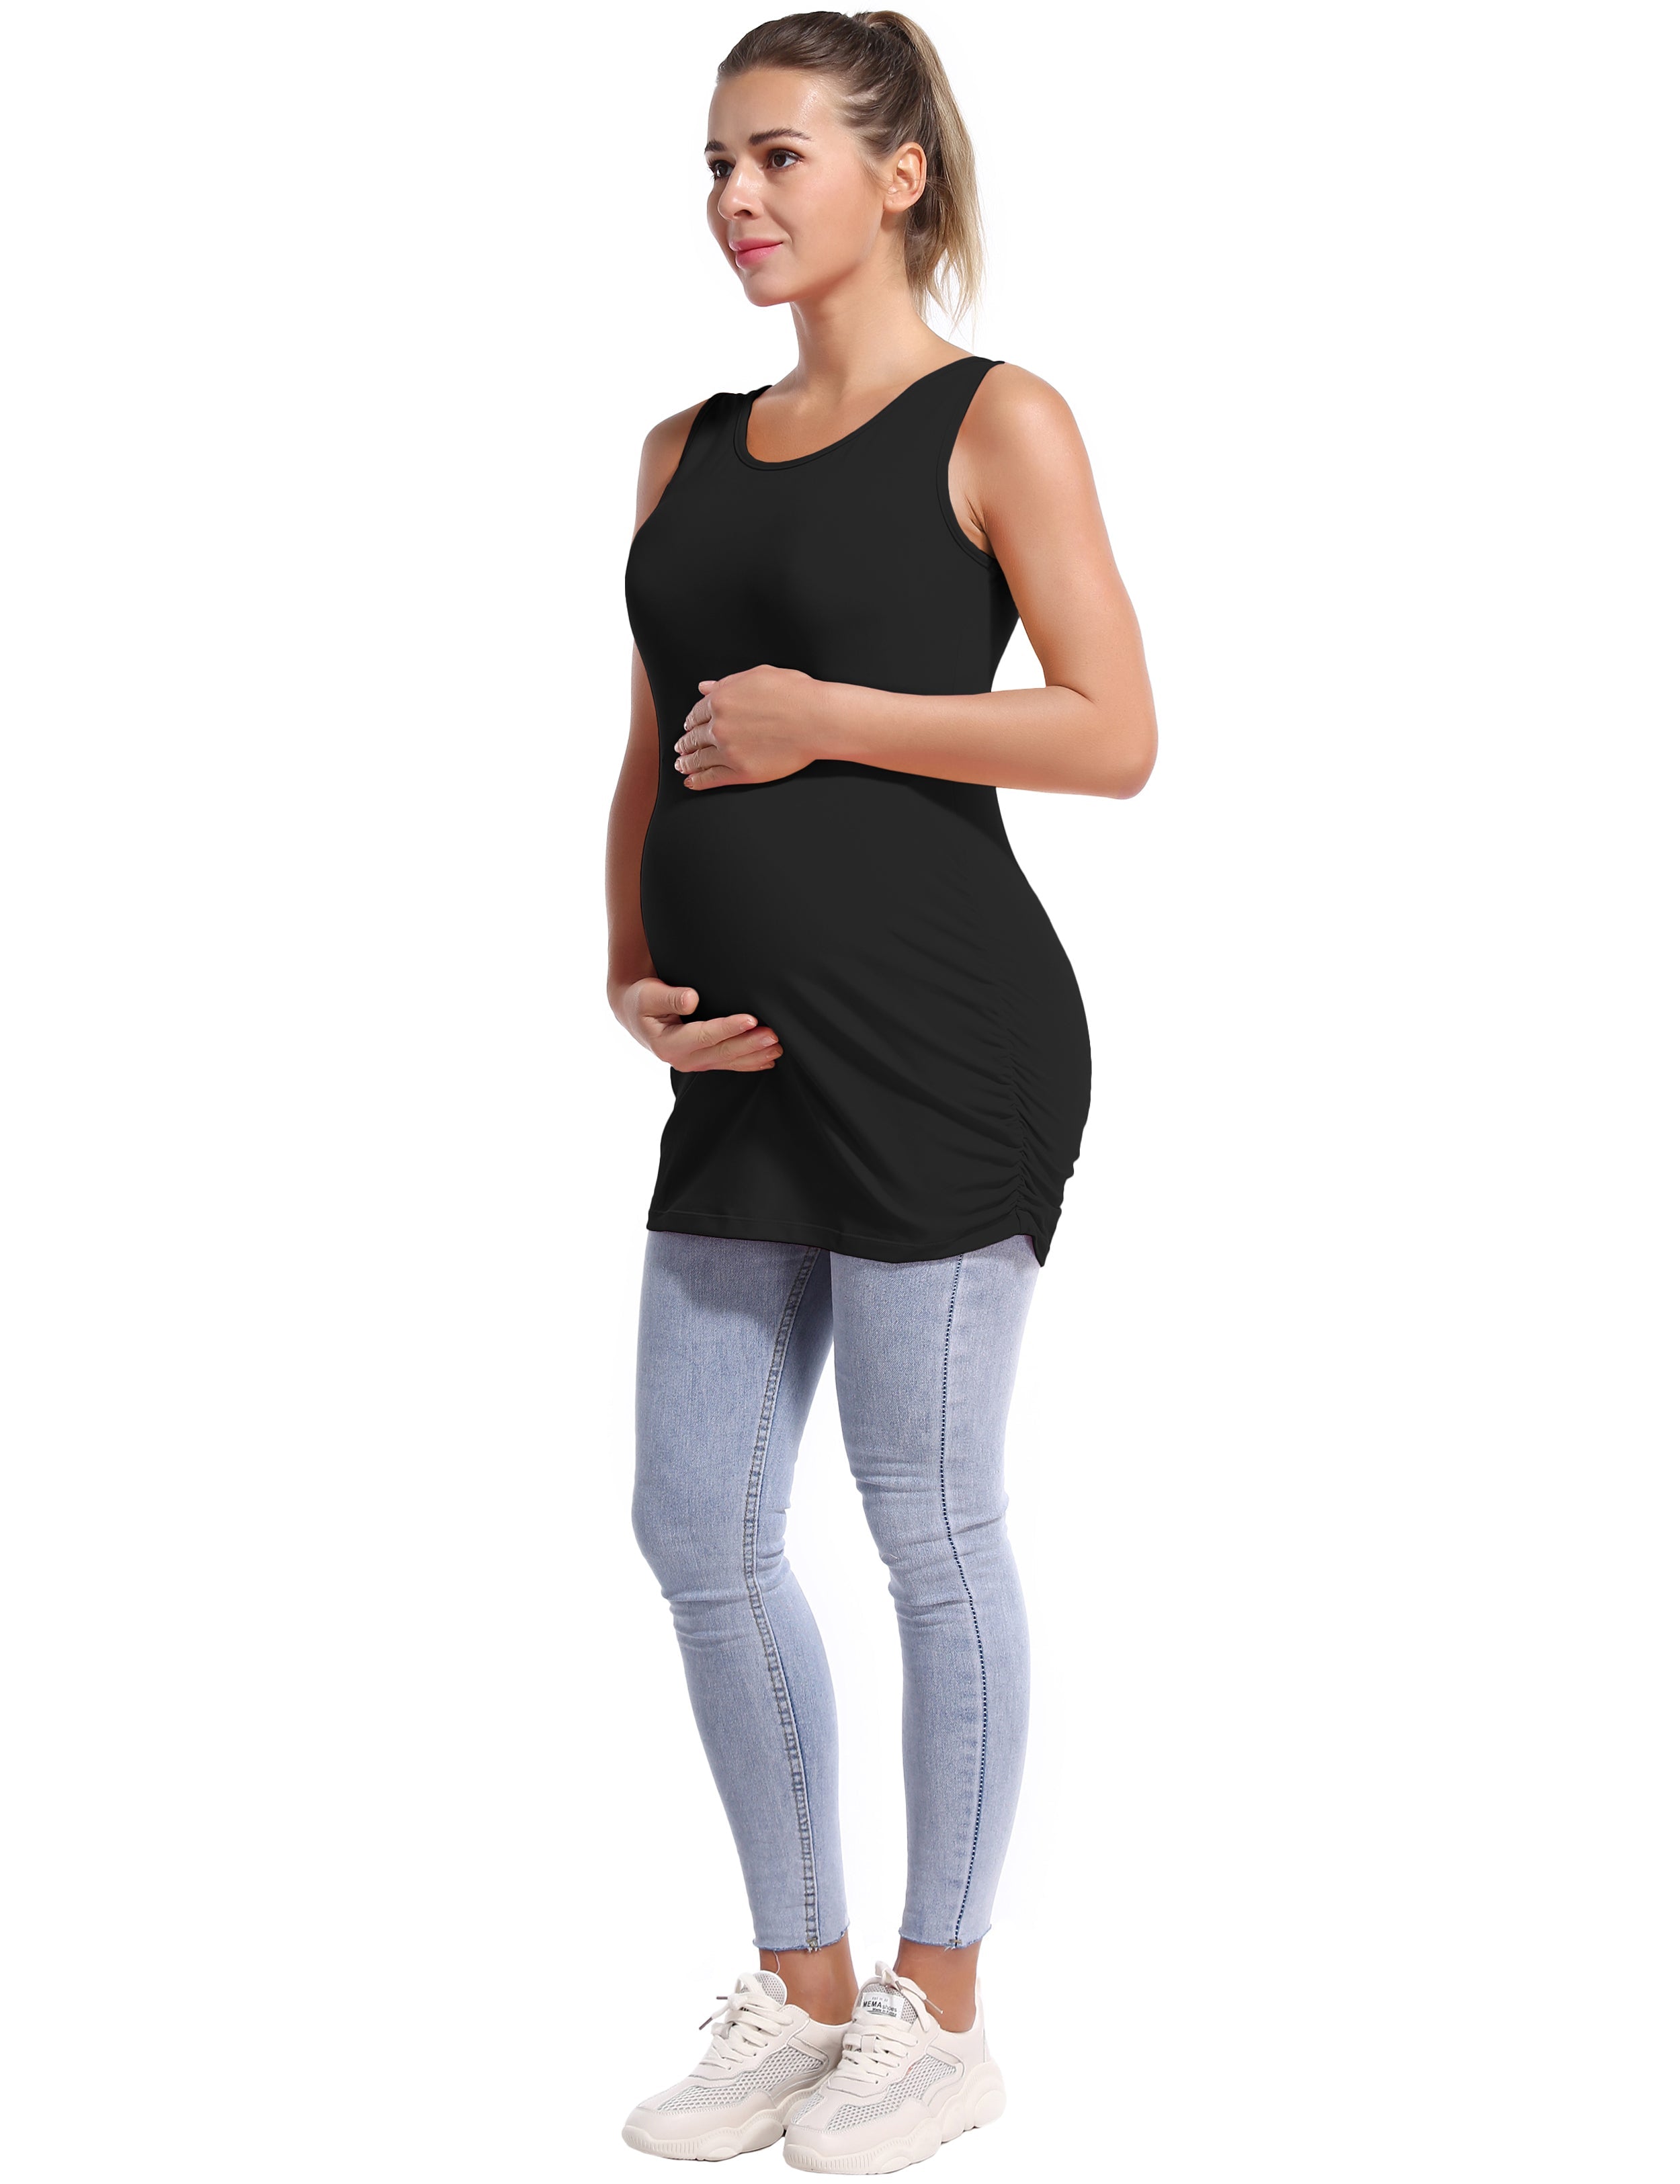 Maternity Side Shirred Tank Top black 92%Nylon/8%Spandex(Cotton Soft) Designed for Maternity So buttery soft, it feels weightless Sweat-wicking Four-way stretch Breathable Contours your body